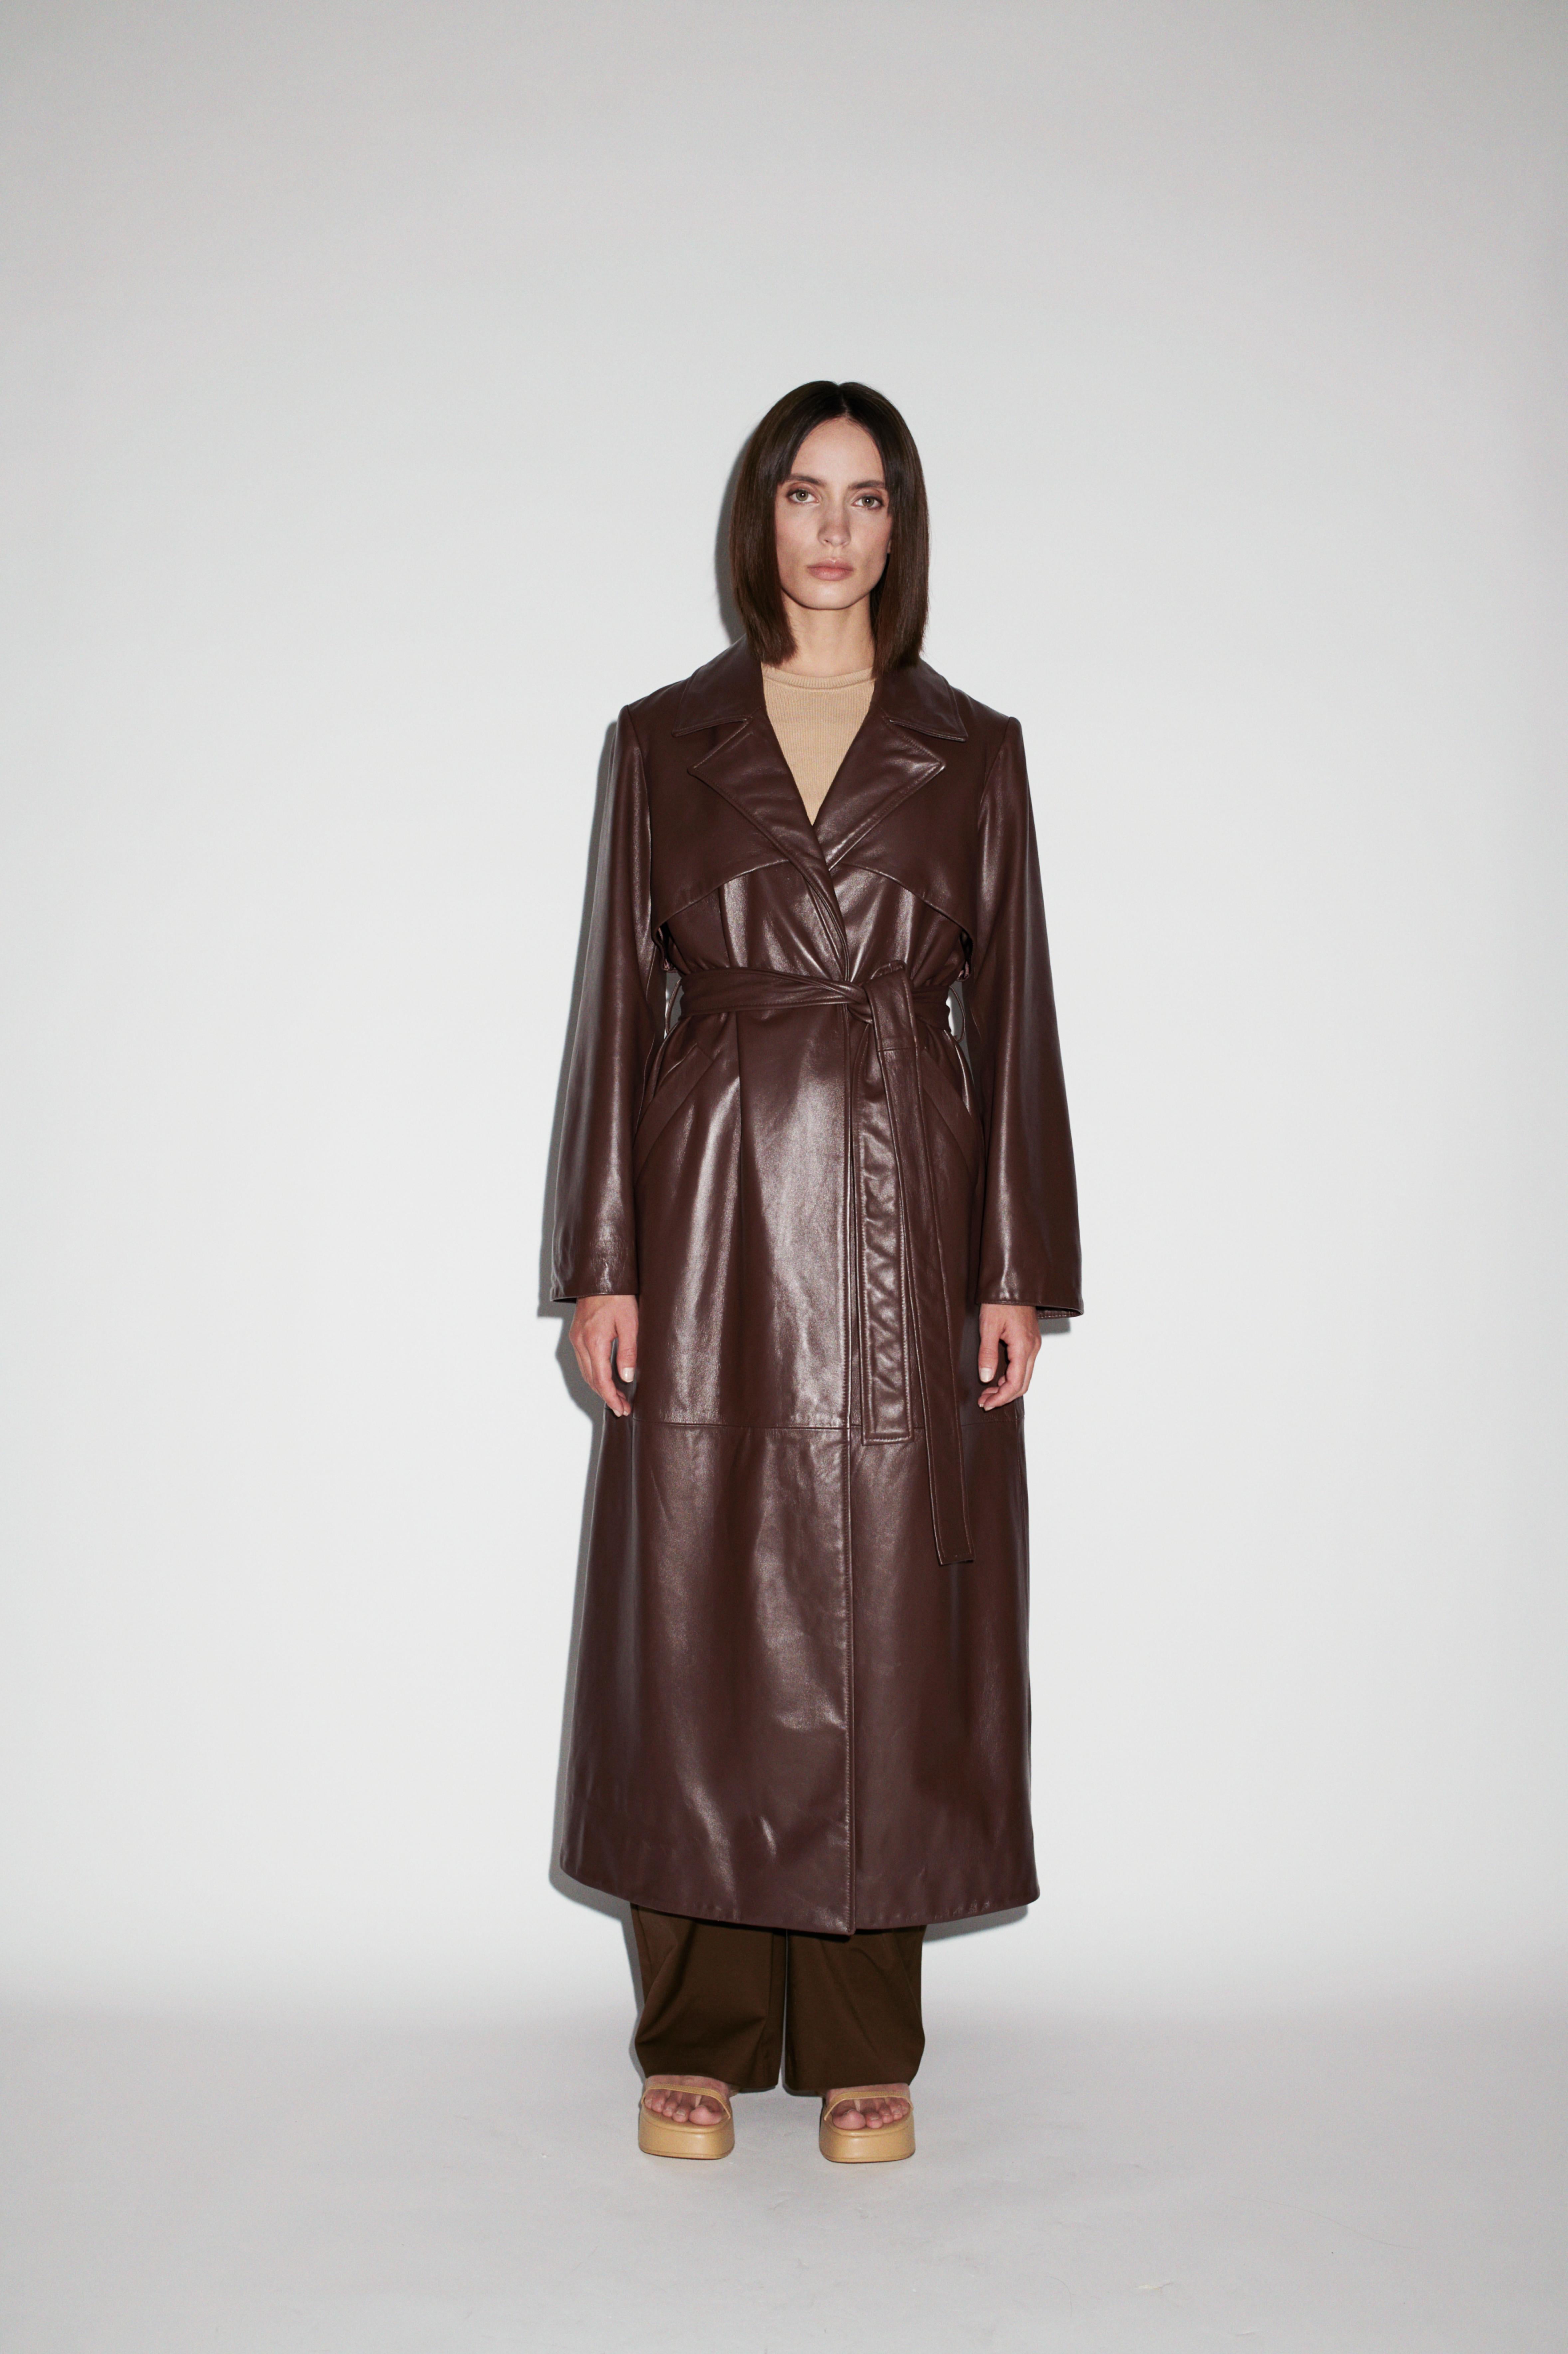 Verheyen London Leather Trench Coat in Black - Size uk 8

Handmade in London, made with 100% Italian Lambs Leather this luxury item is an investment piece to wear for a lifetime.  This piece is made by artisans in London, expert artisans who make